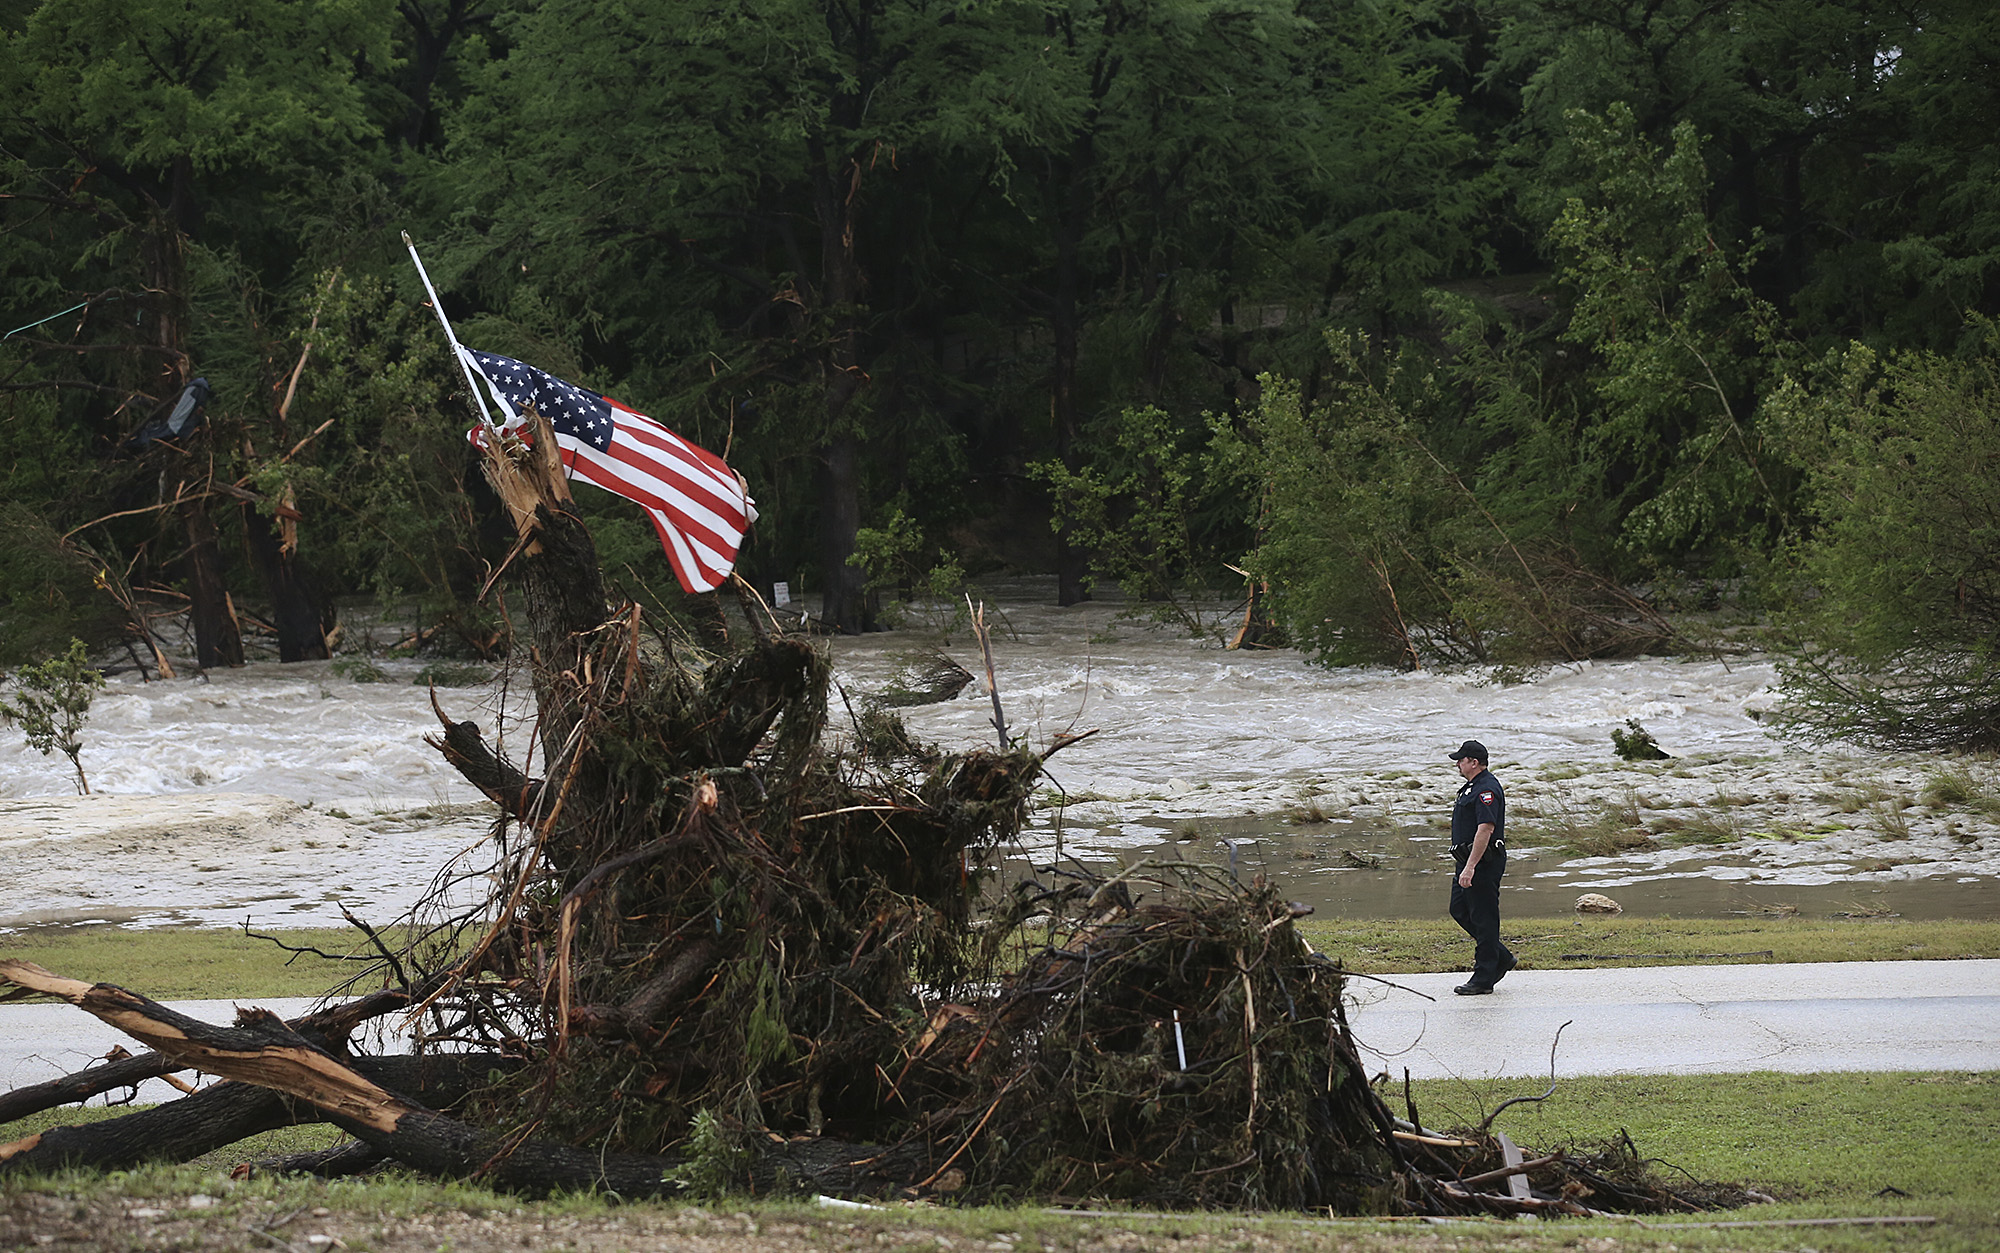 Texas Floods: Eight People in Wimberley Vacation House Are Missing